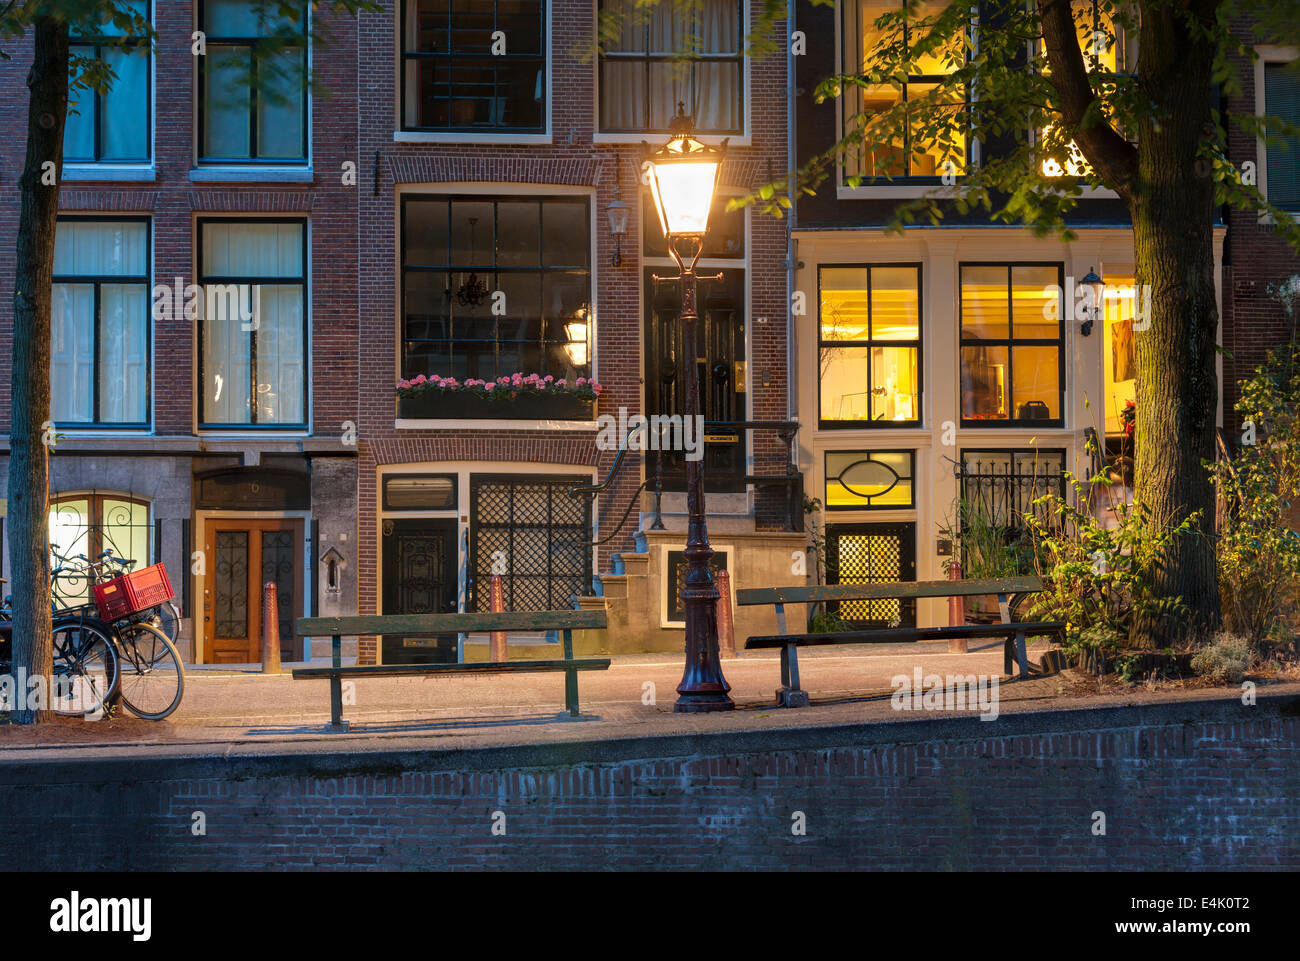 Amsterdam Canal night.  Leidsegracht Canal Amsterdam with popular canal-side bench from film The Fault in Our Stars TFiOS Stock Photo